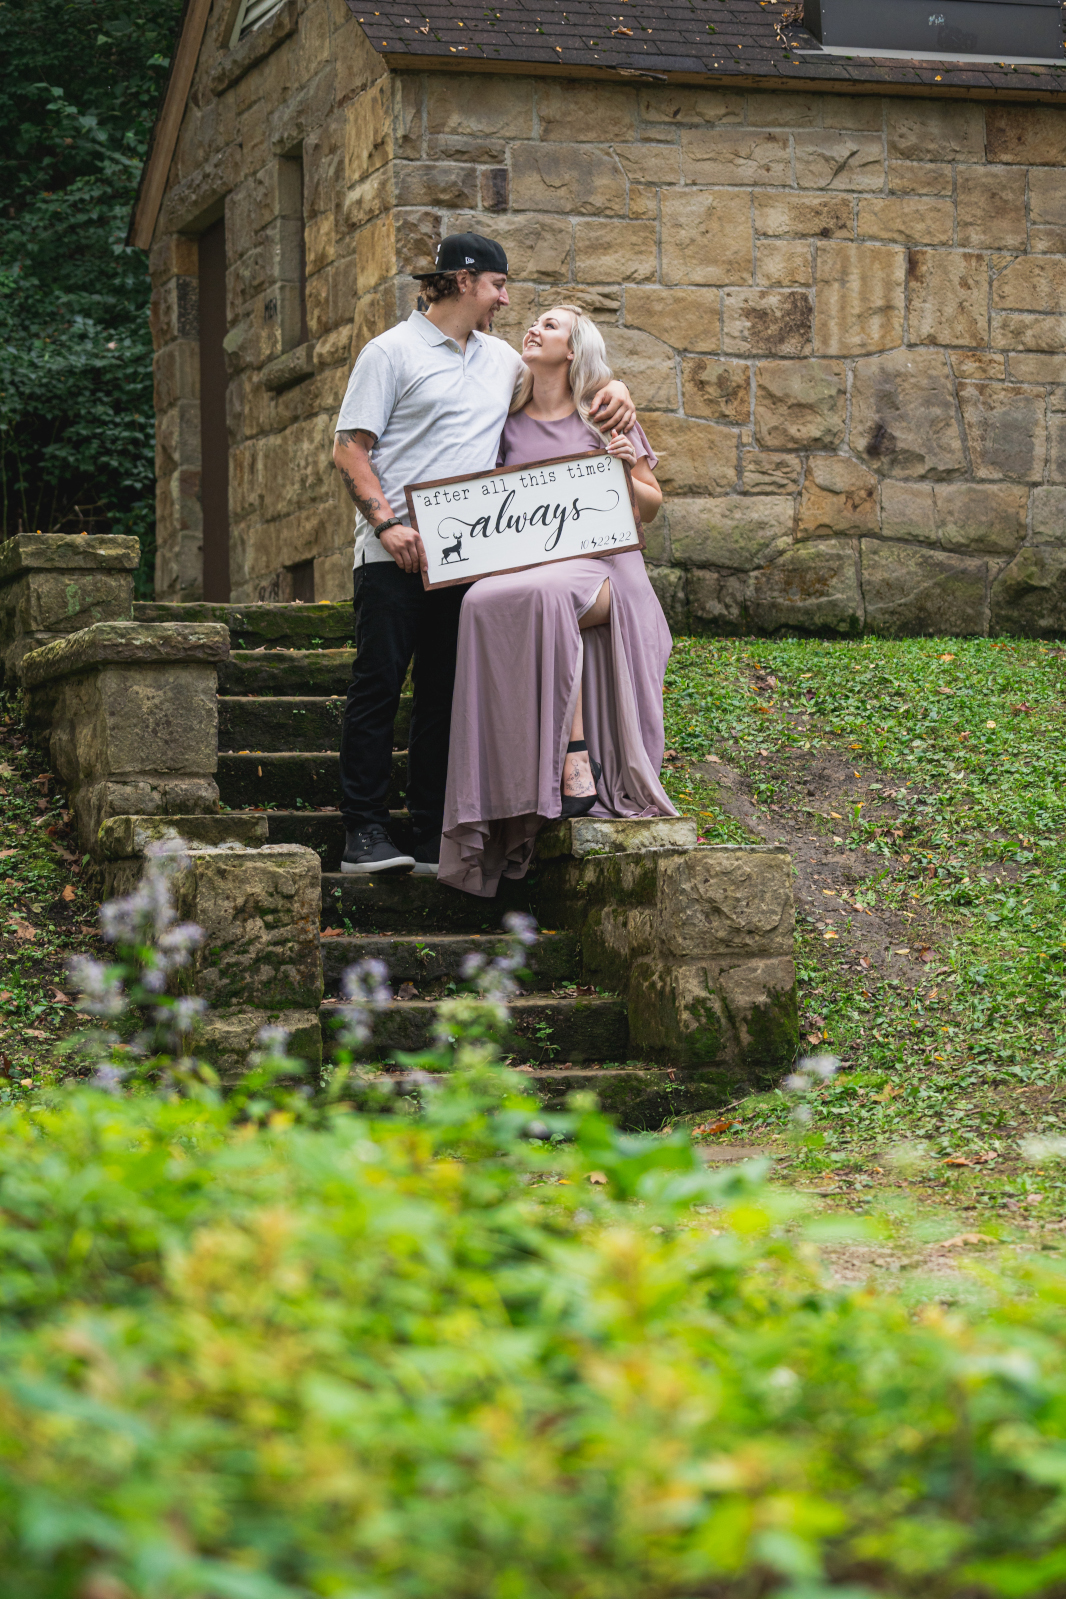 Man and woman fiancee engagement photo, couple portrait, Harry Potter sign photo prop, always, love, stone steps, trees, nature, outdoor fall engagement photo session at Grand Pacific Junction Historic Shopping District